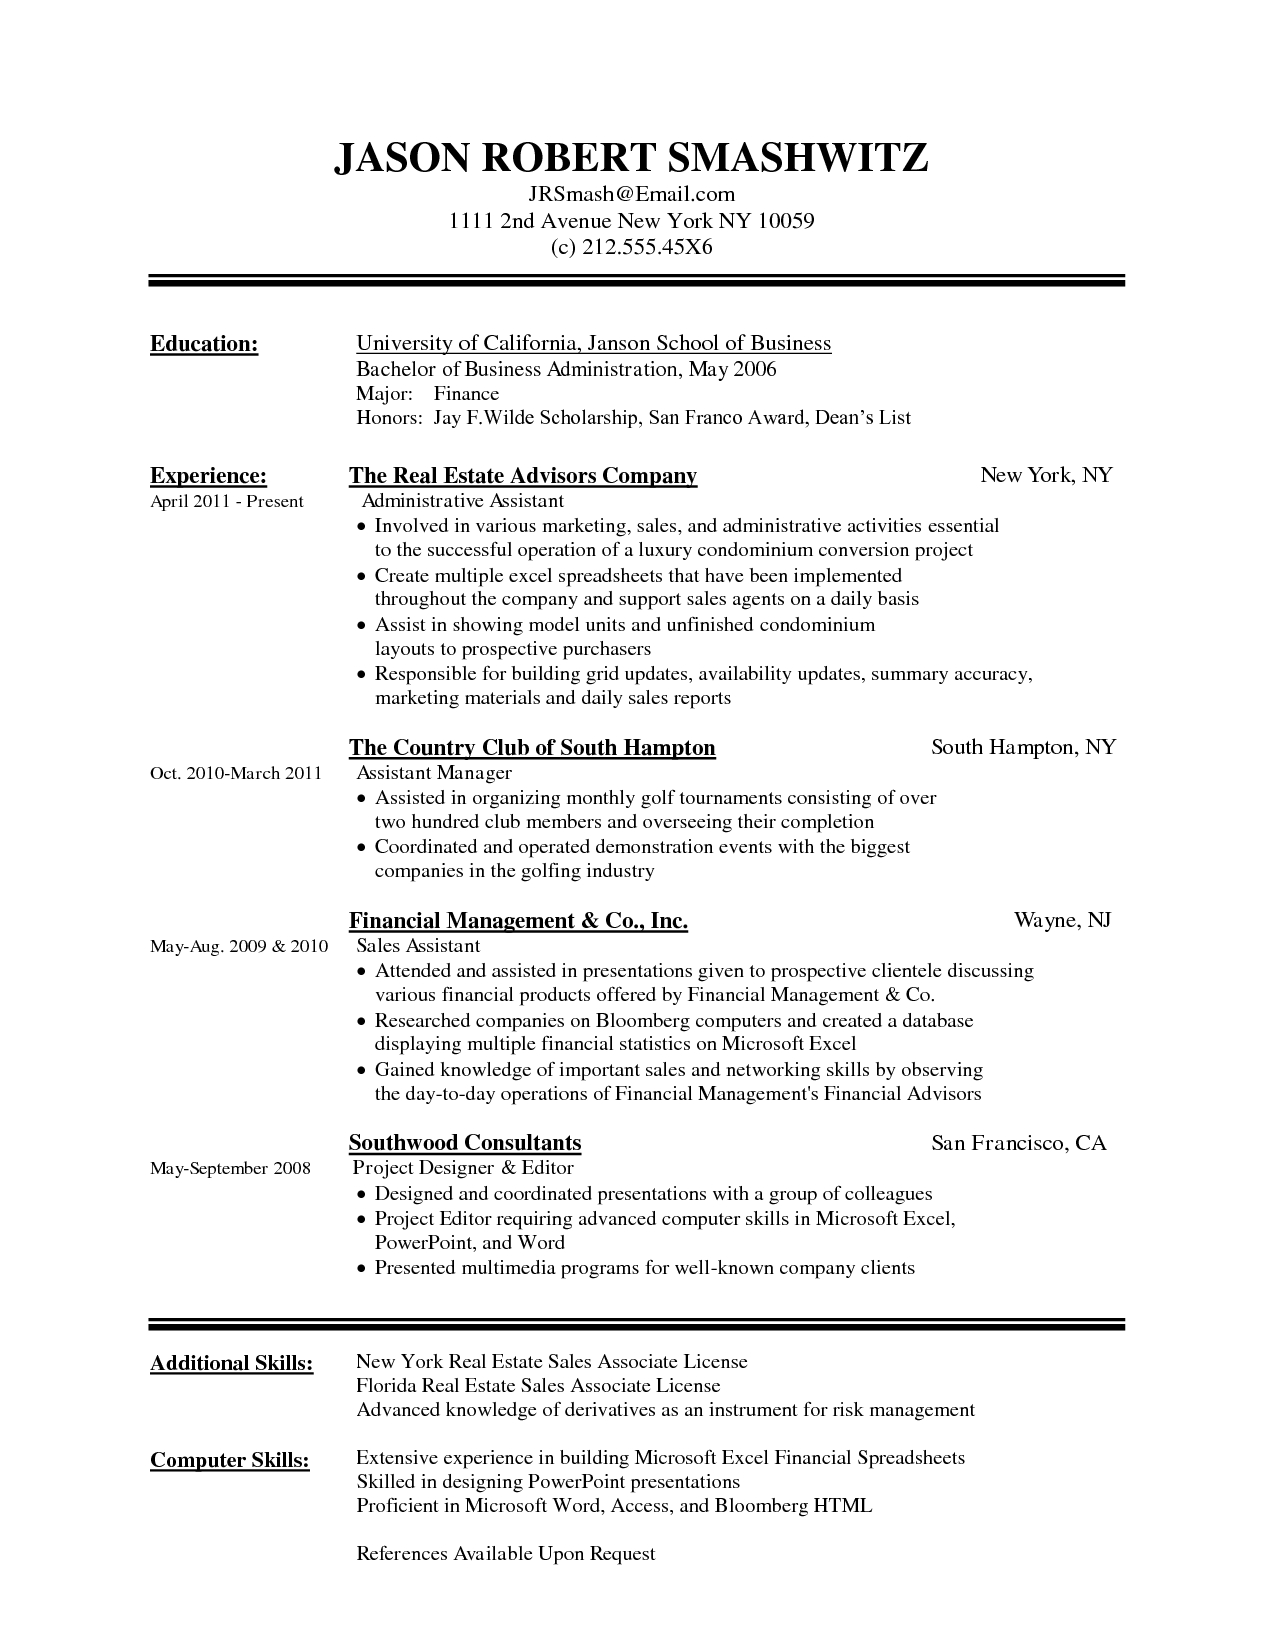 Resume Template Word 2013 - Free Resume Templates In Resume Templates Word 2013